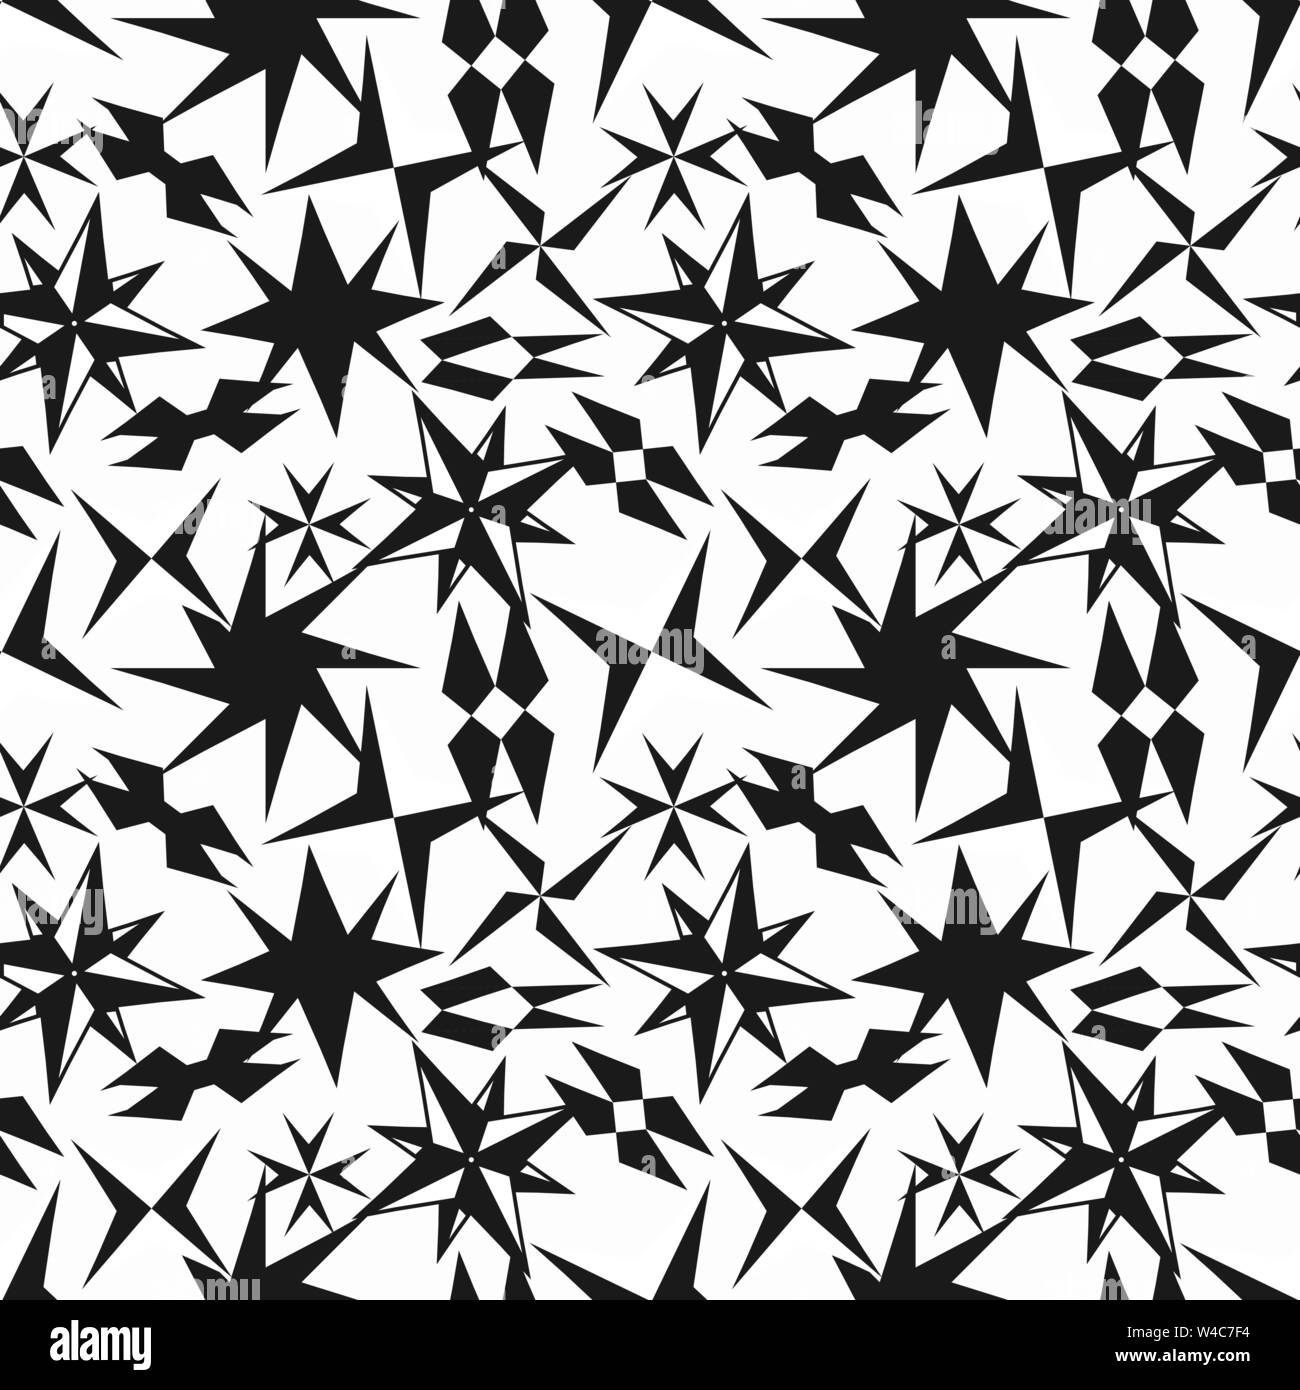 black abstract geometric objects on a white background seamless pattern Stock Vector